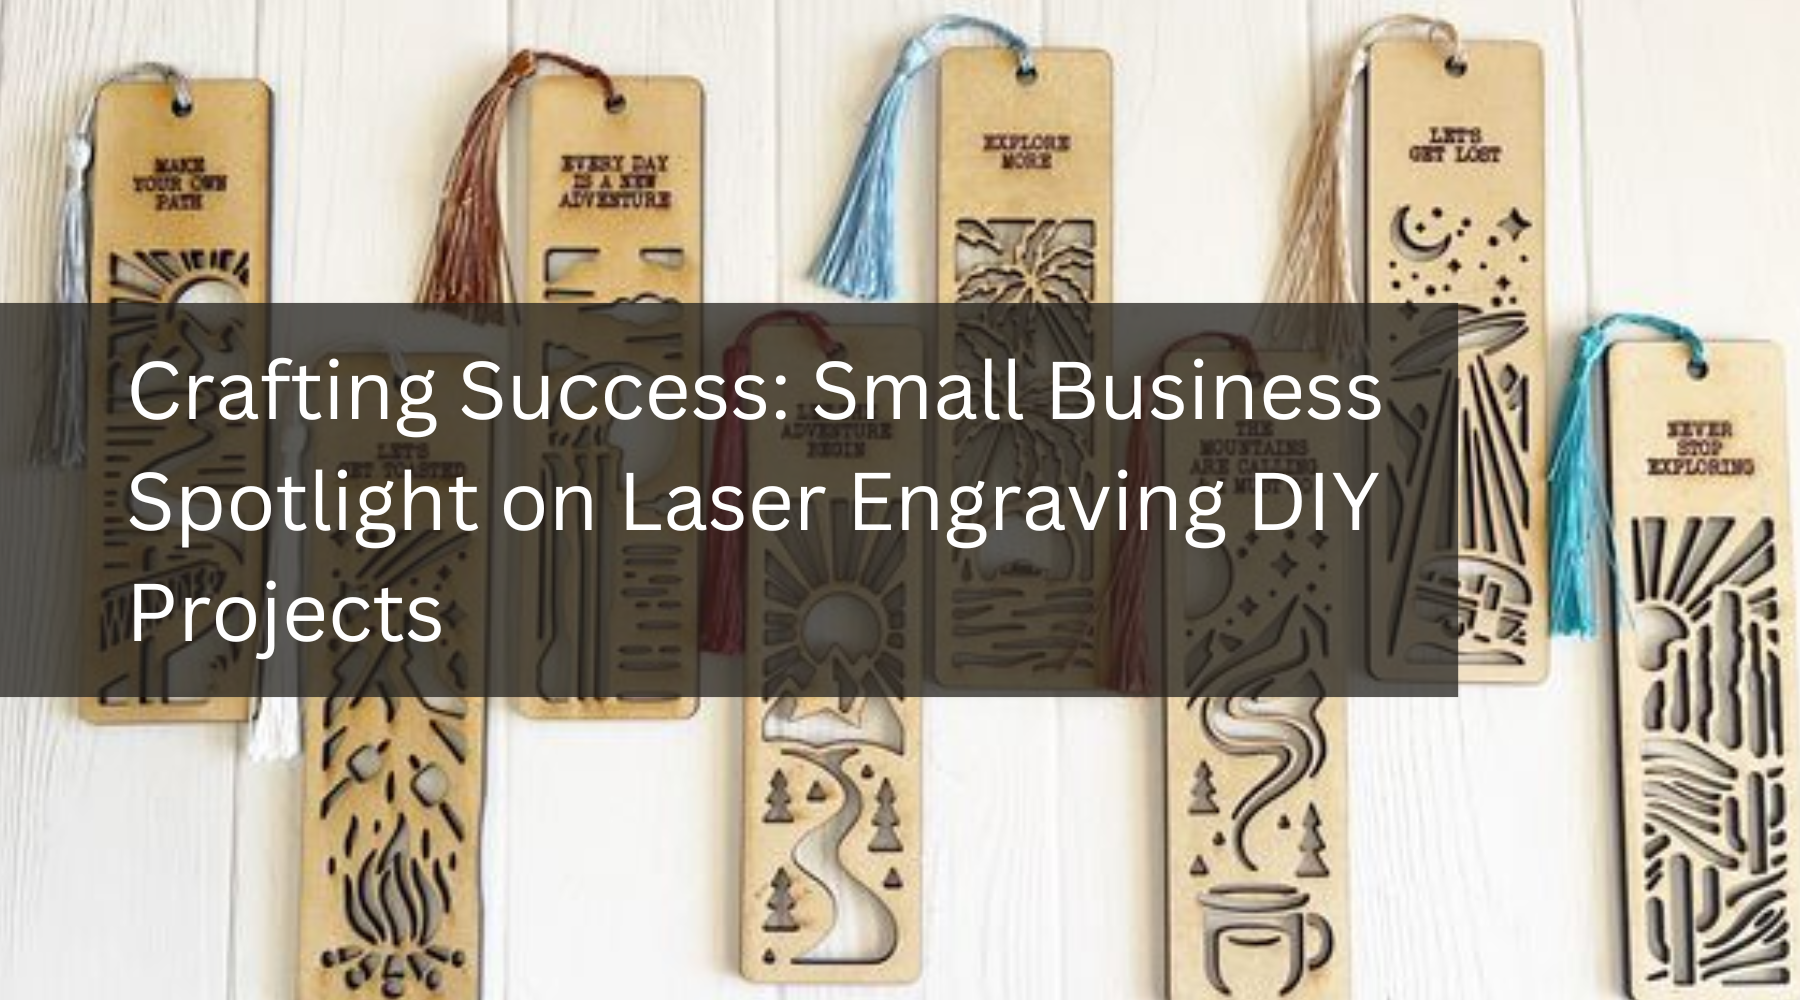 Crafting Success: Small Business Spotlight on Laser Engraving DIY Projects